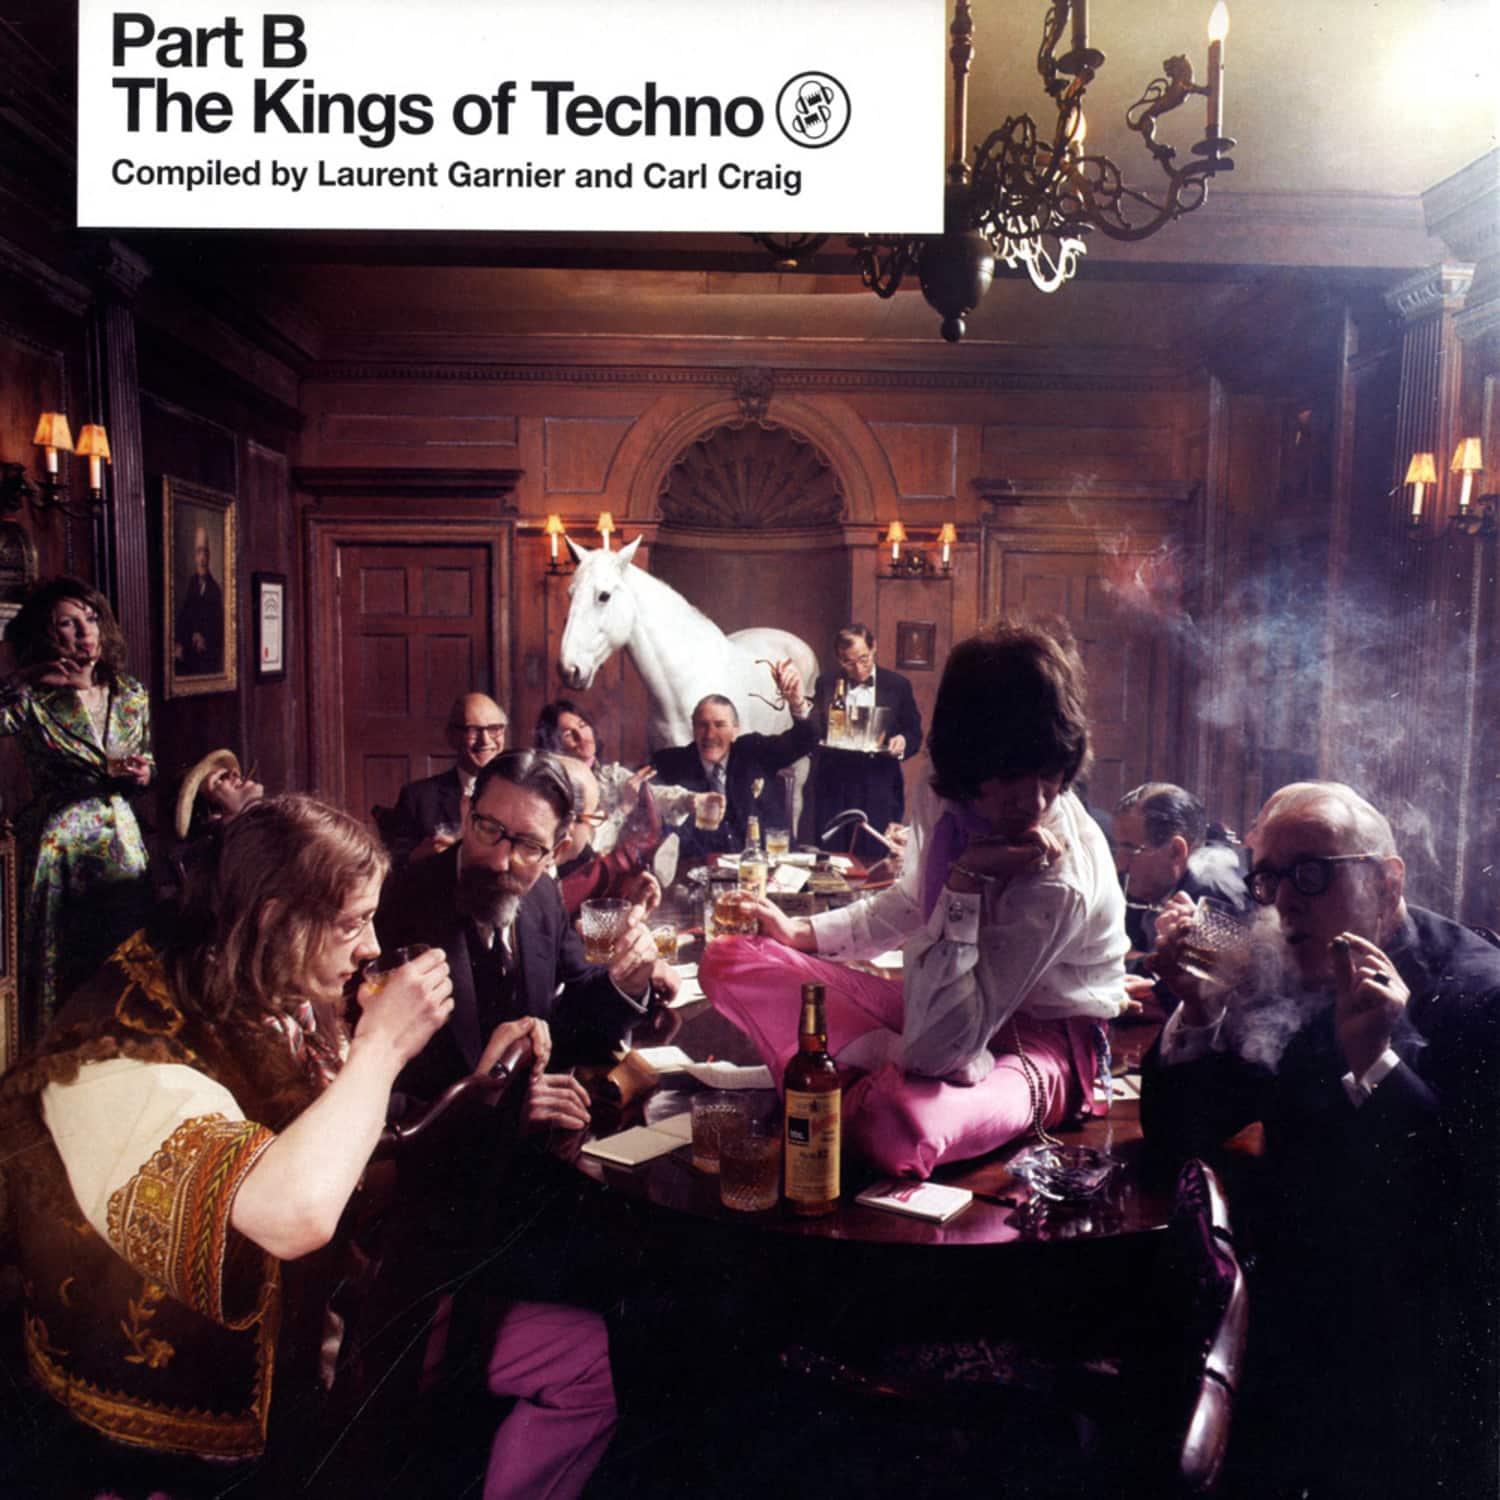 V/a Compiled By Laurent Garnier & Carl Craig - PT 2 THE KINGS OF TECHNIO 